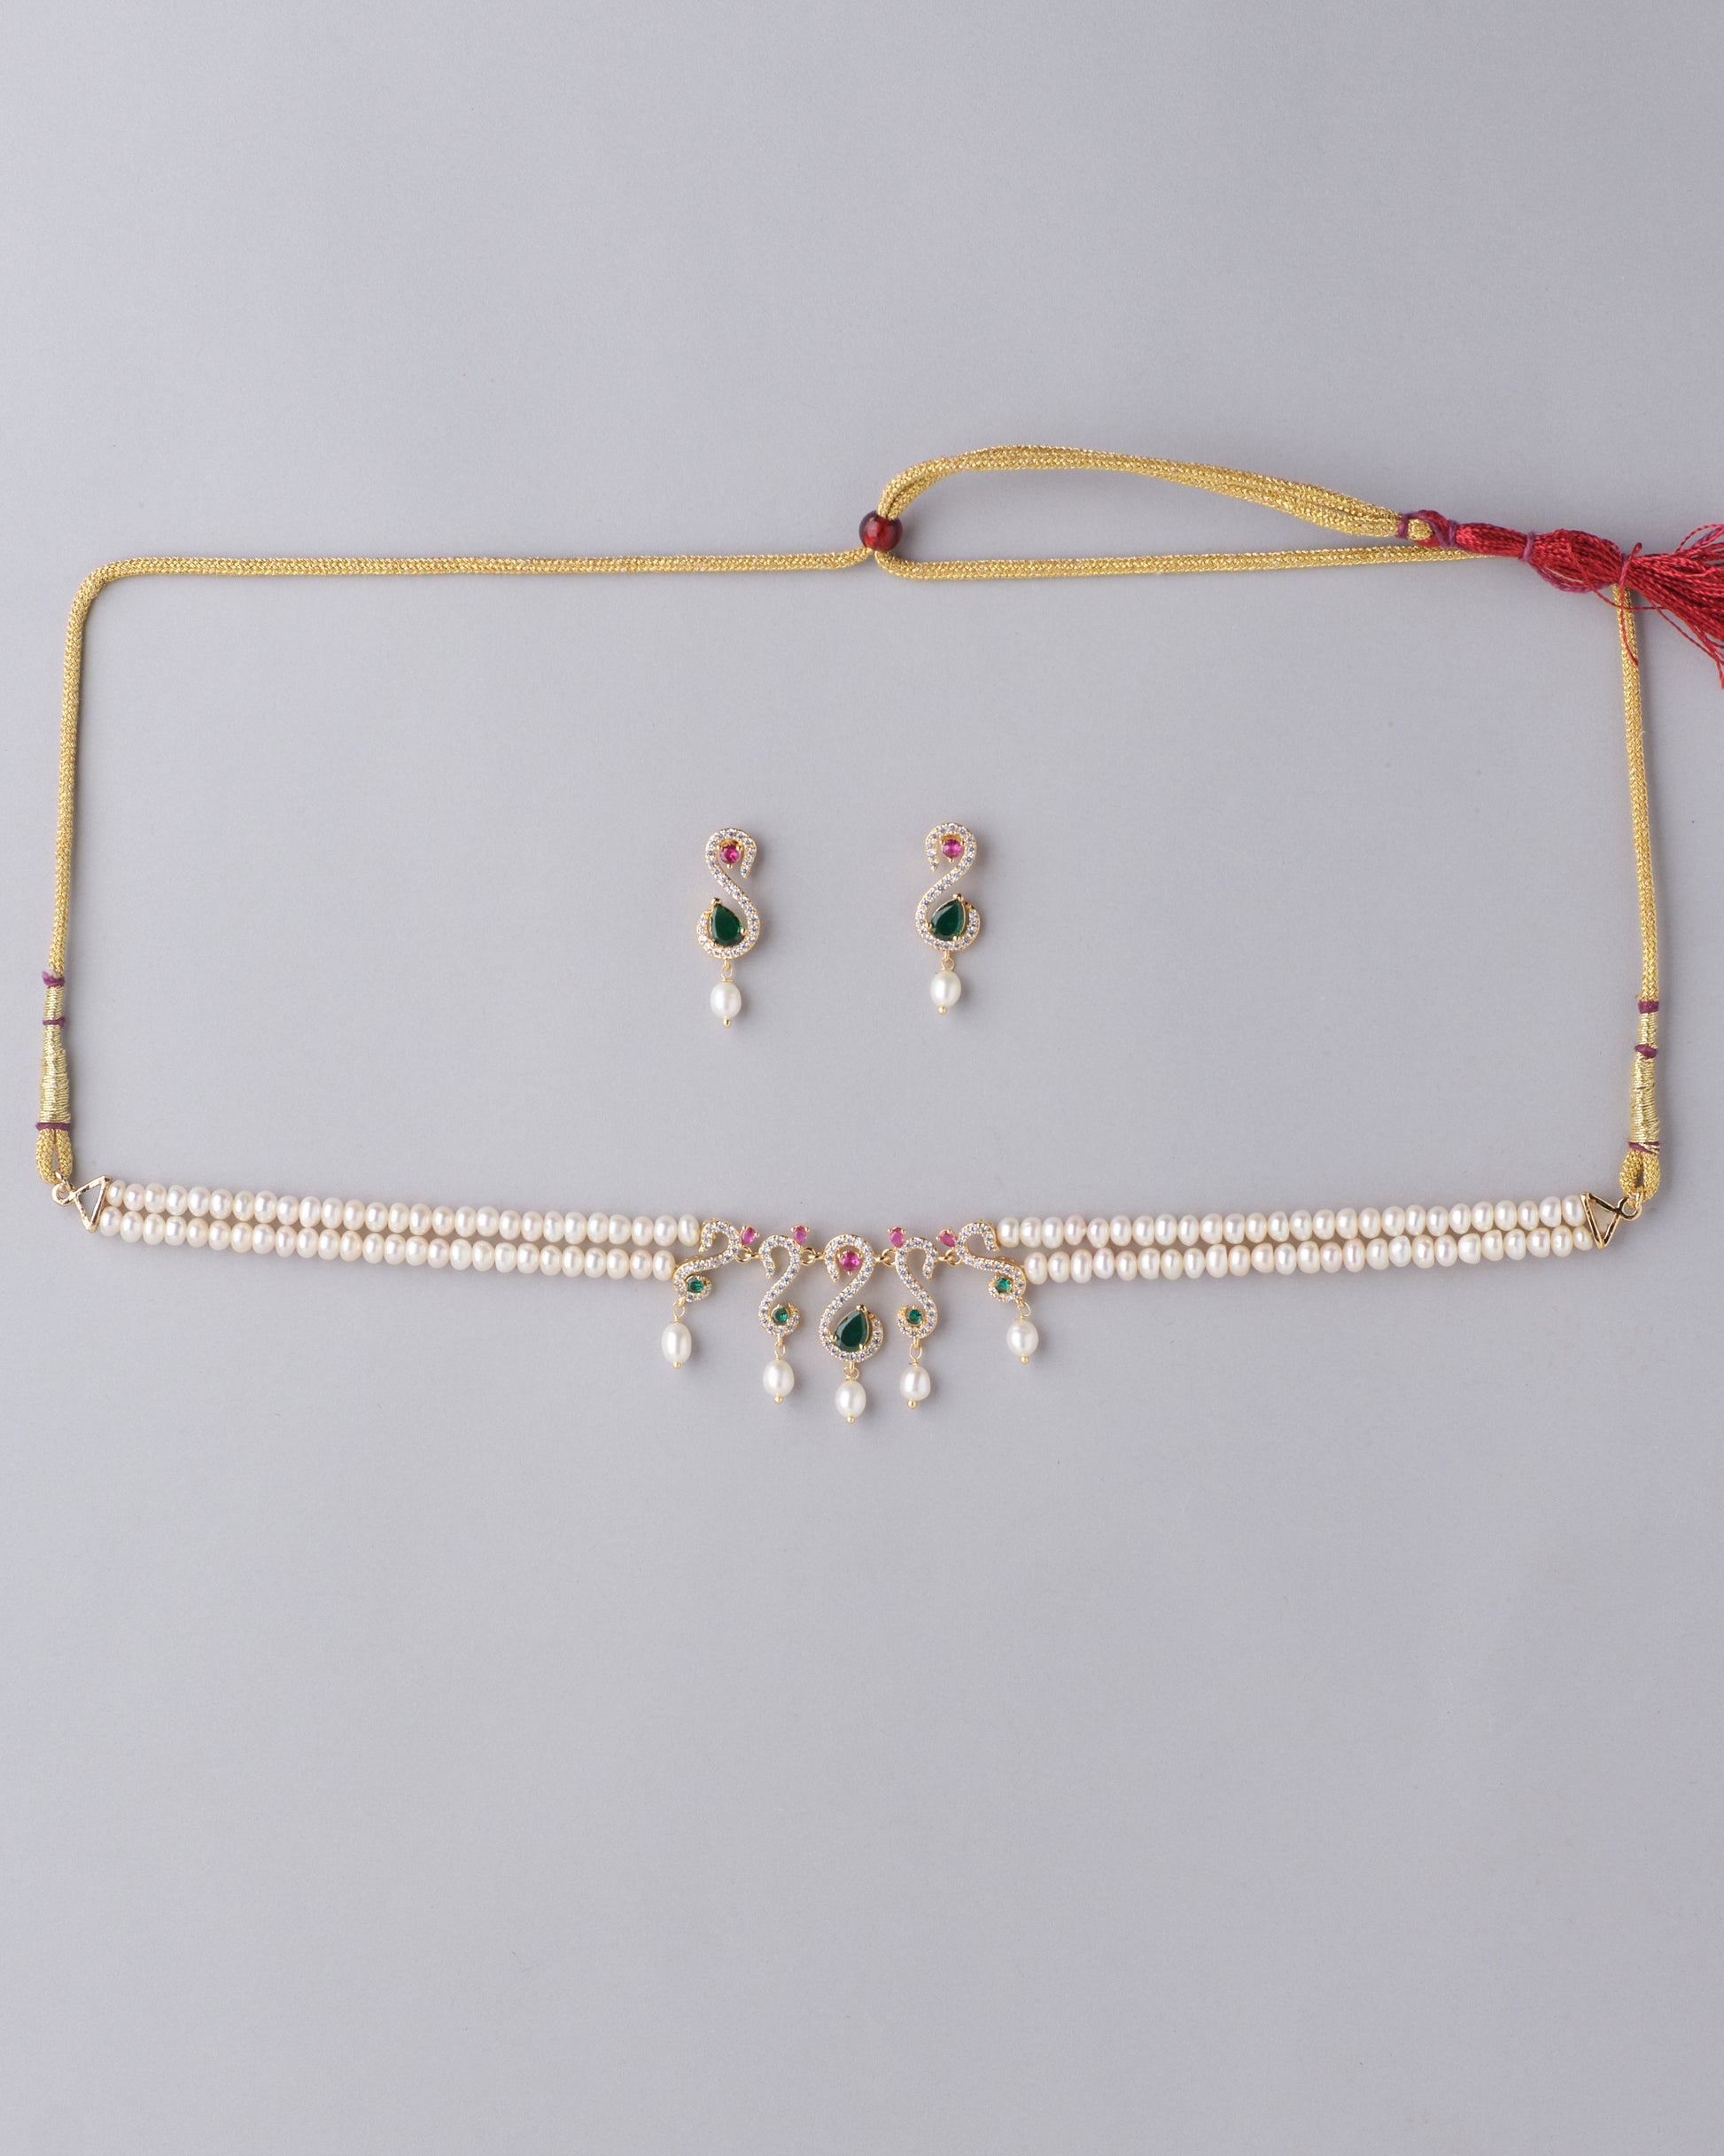 Ravishing Multi Stone Pearl Necklace Set by Chandrani Pearls with matching earrings on a neutral background.